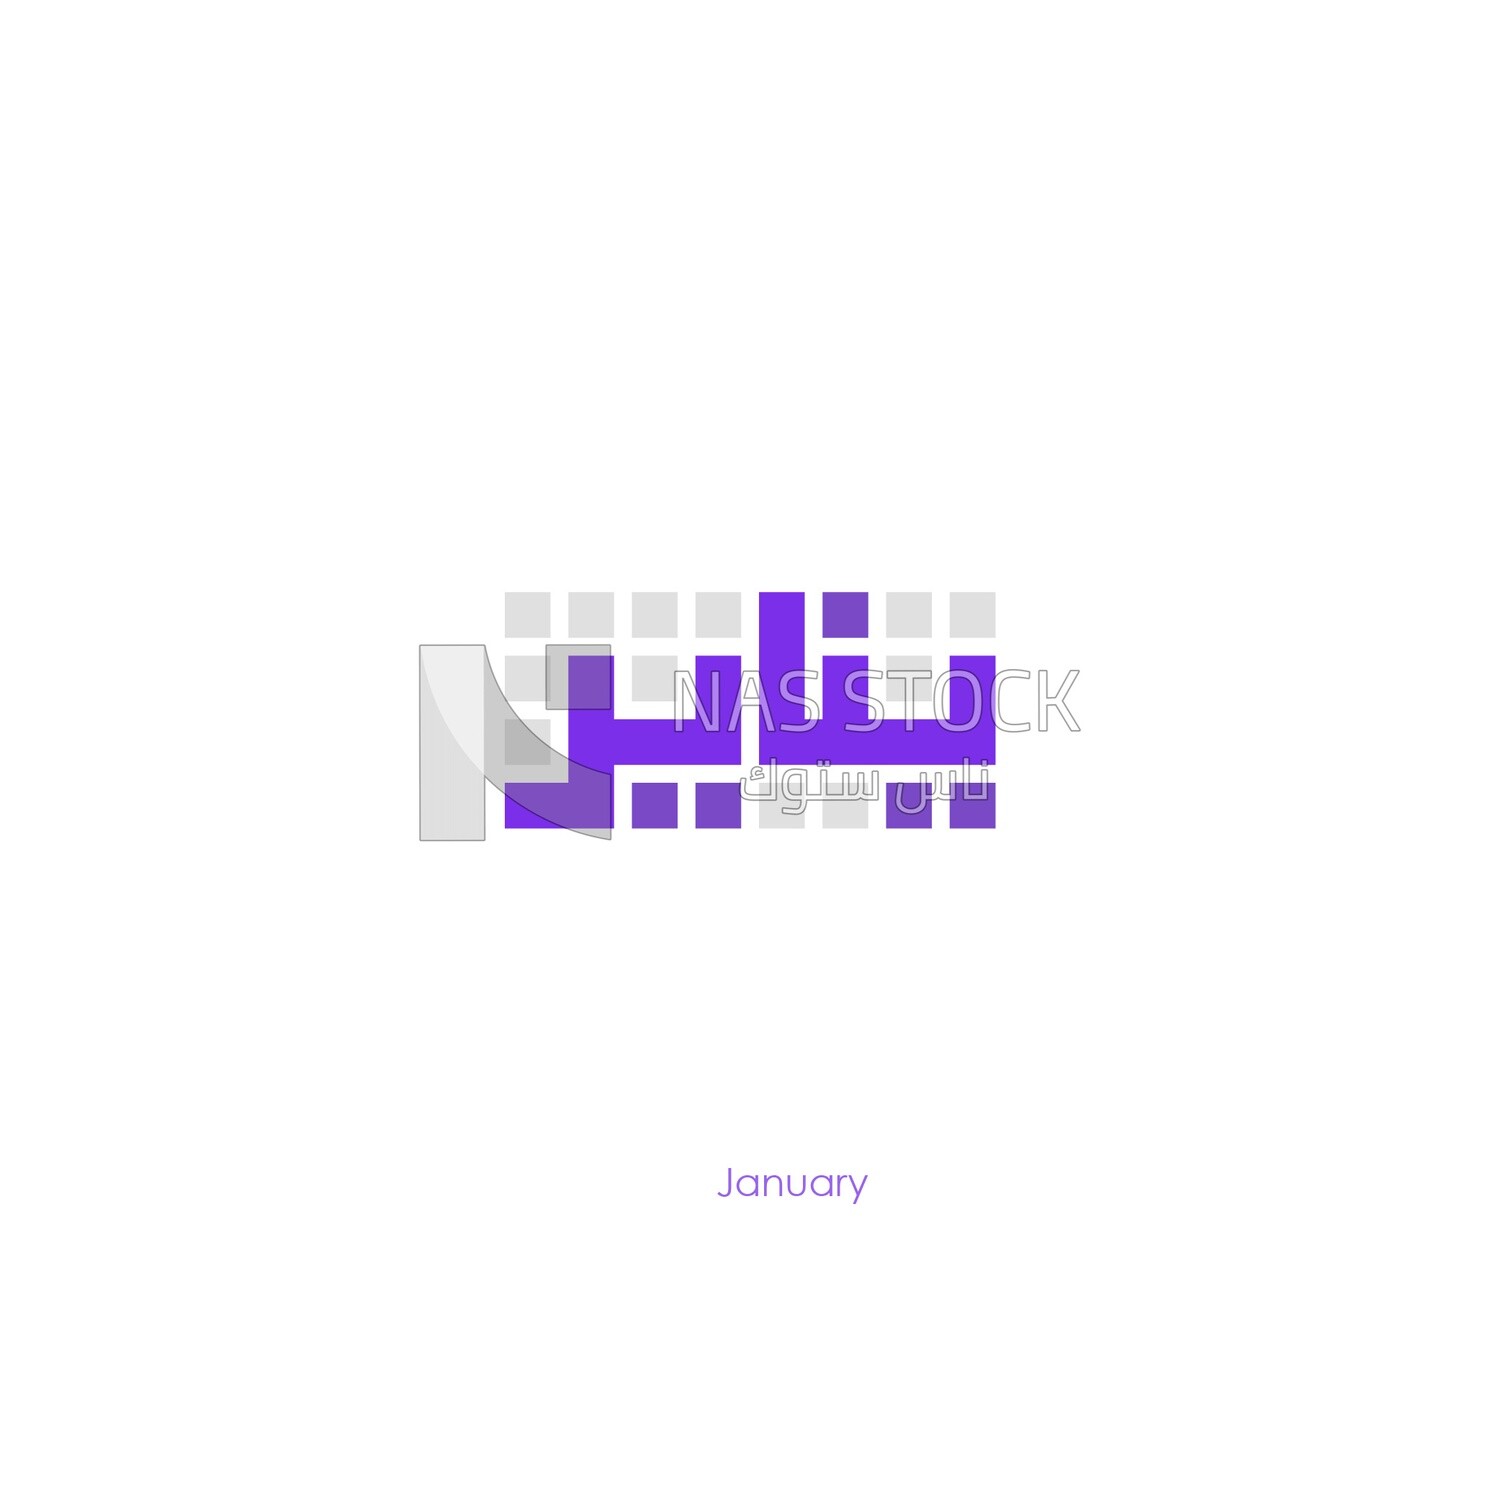 Illustration design, Arabic calligraphy, for the first month &quot;January&quot; in Kufic script